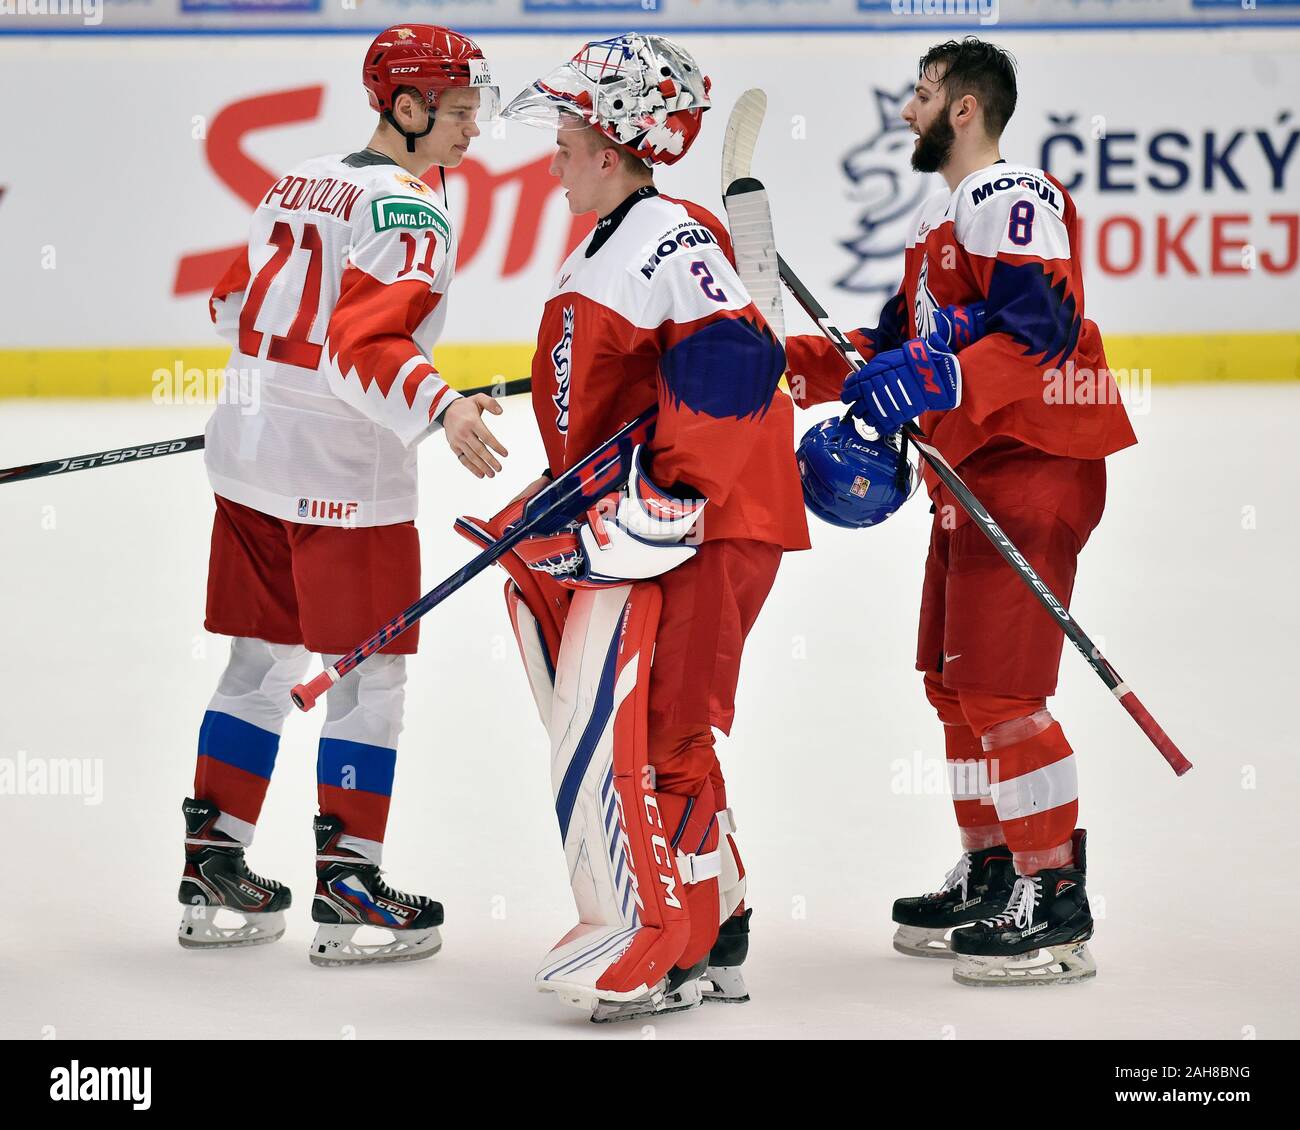 Trevor Zegras (USA) in action during the 2020 IIHF World Junior Ice Hockey  Championships Group B match between USA and Czech Republic in Ostrava, Czec  Stock Photo - Alamy